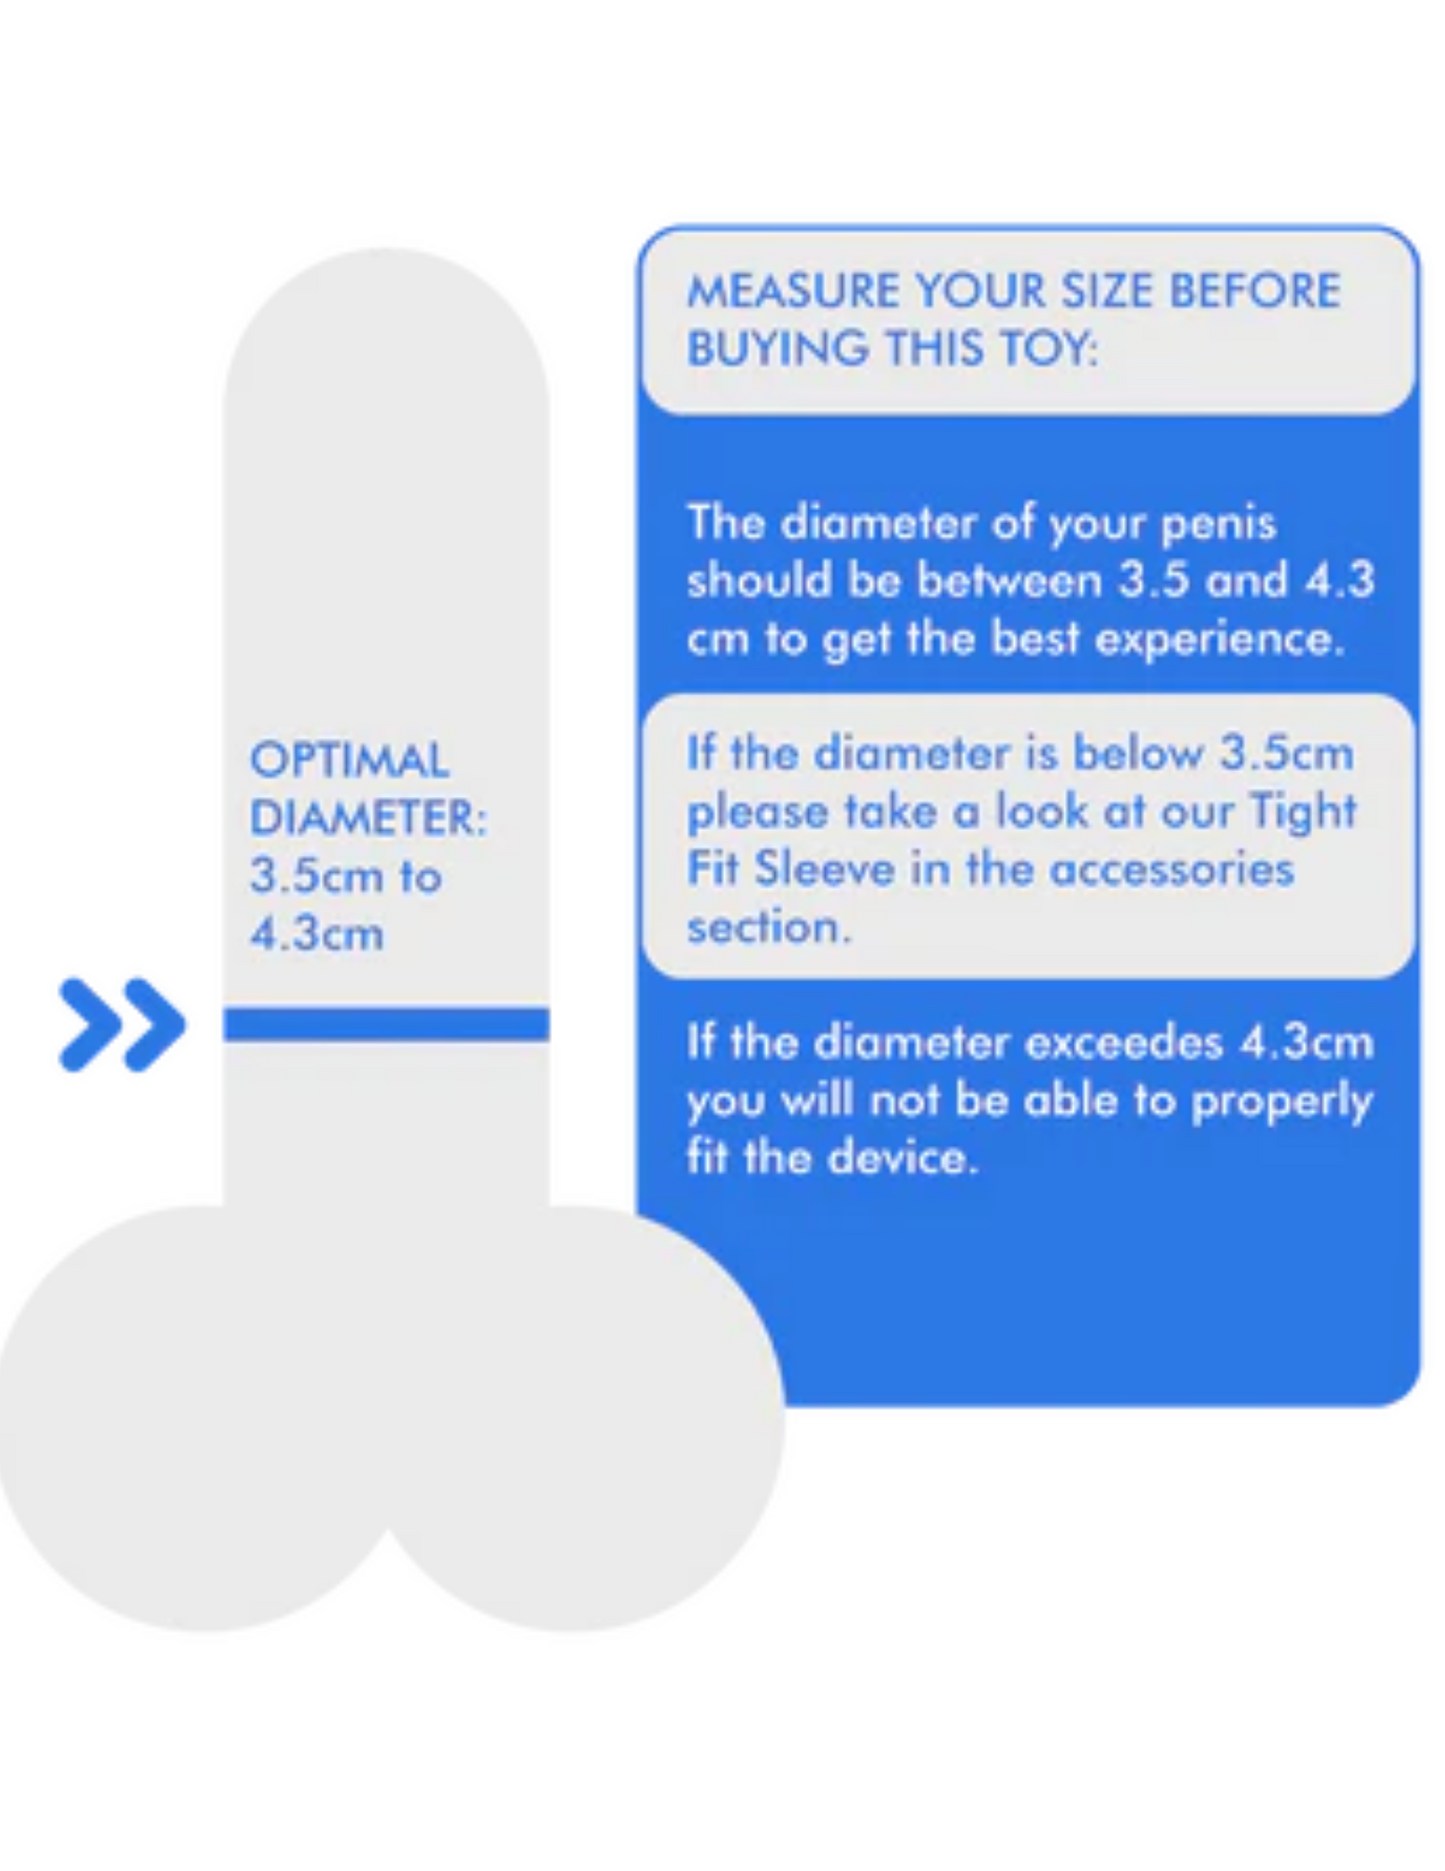 How to measure yourself to see if the Onyx+ is the right fit.